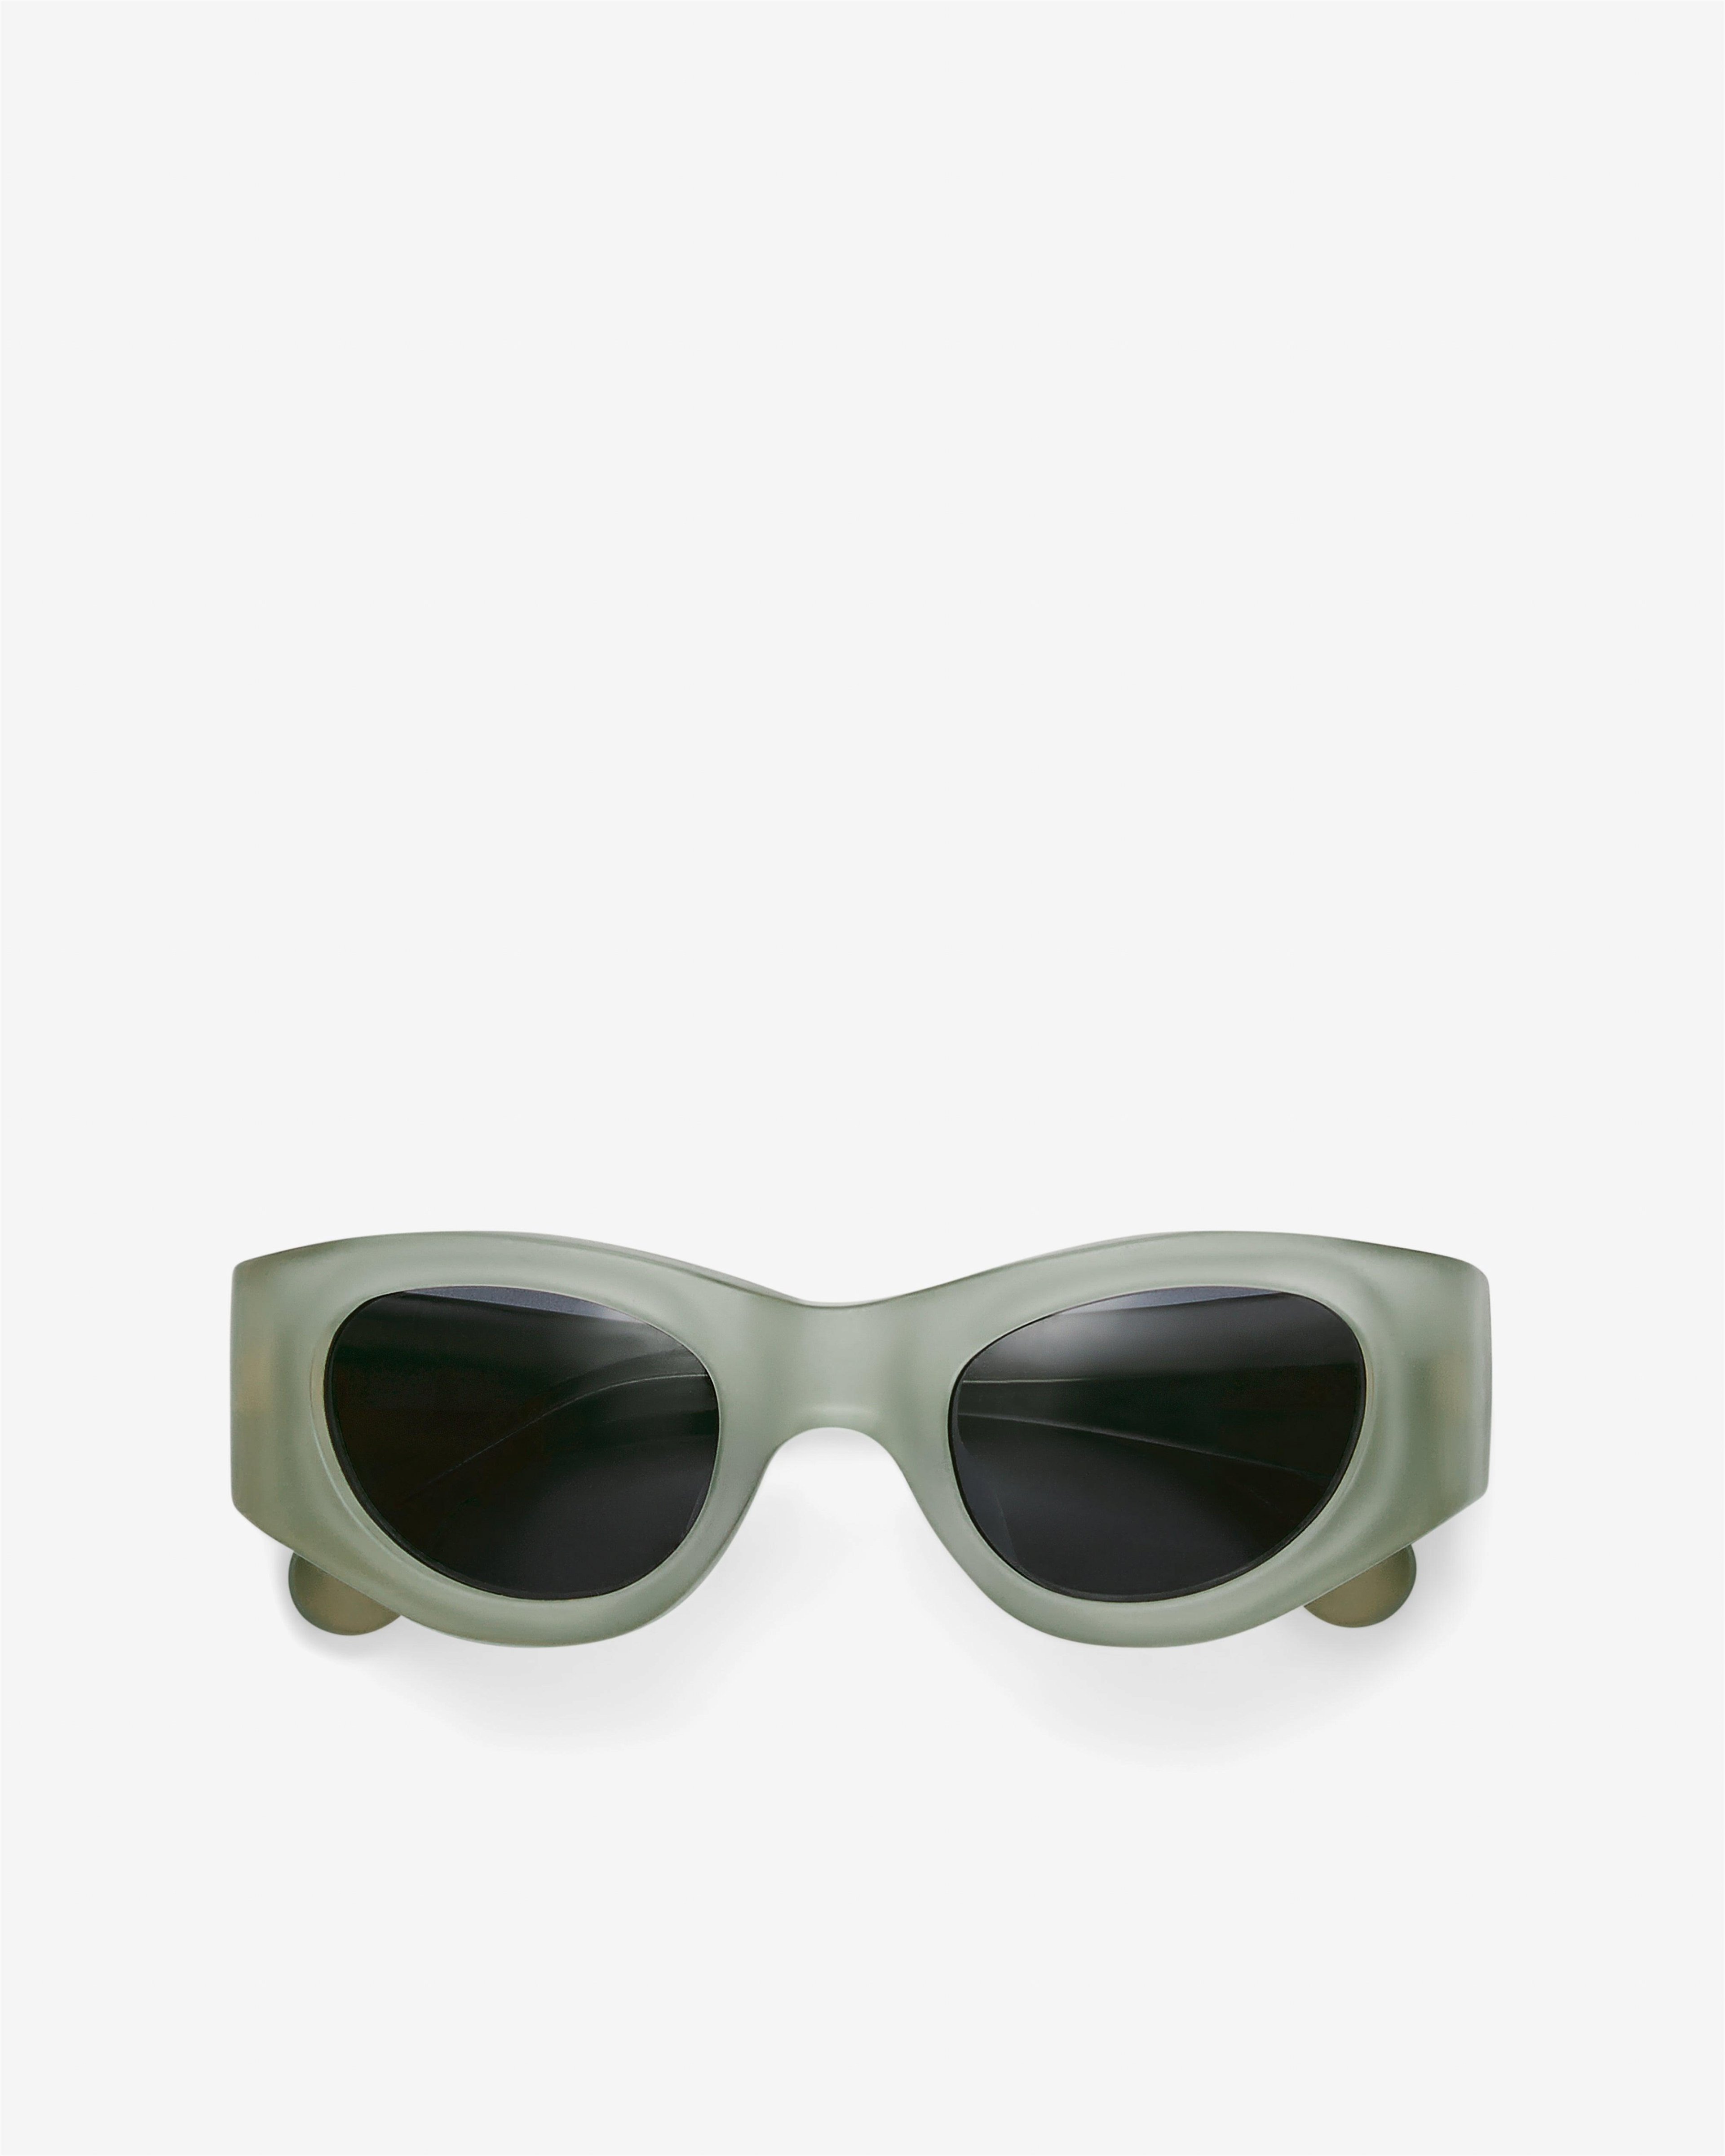 ERL - Bro Sunglasses - (Grey) by ERL